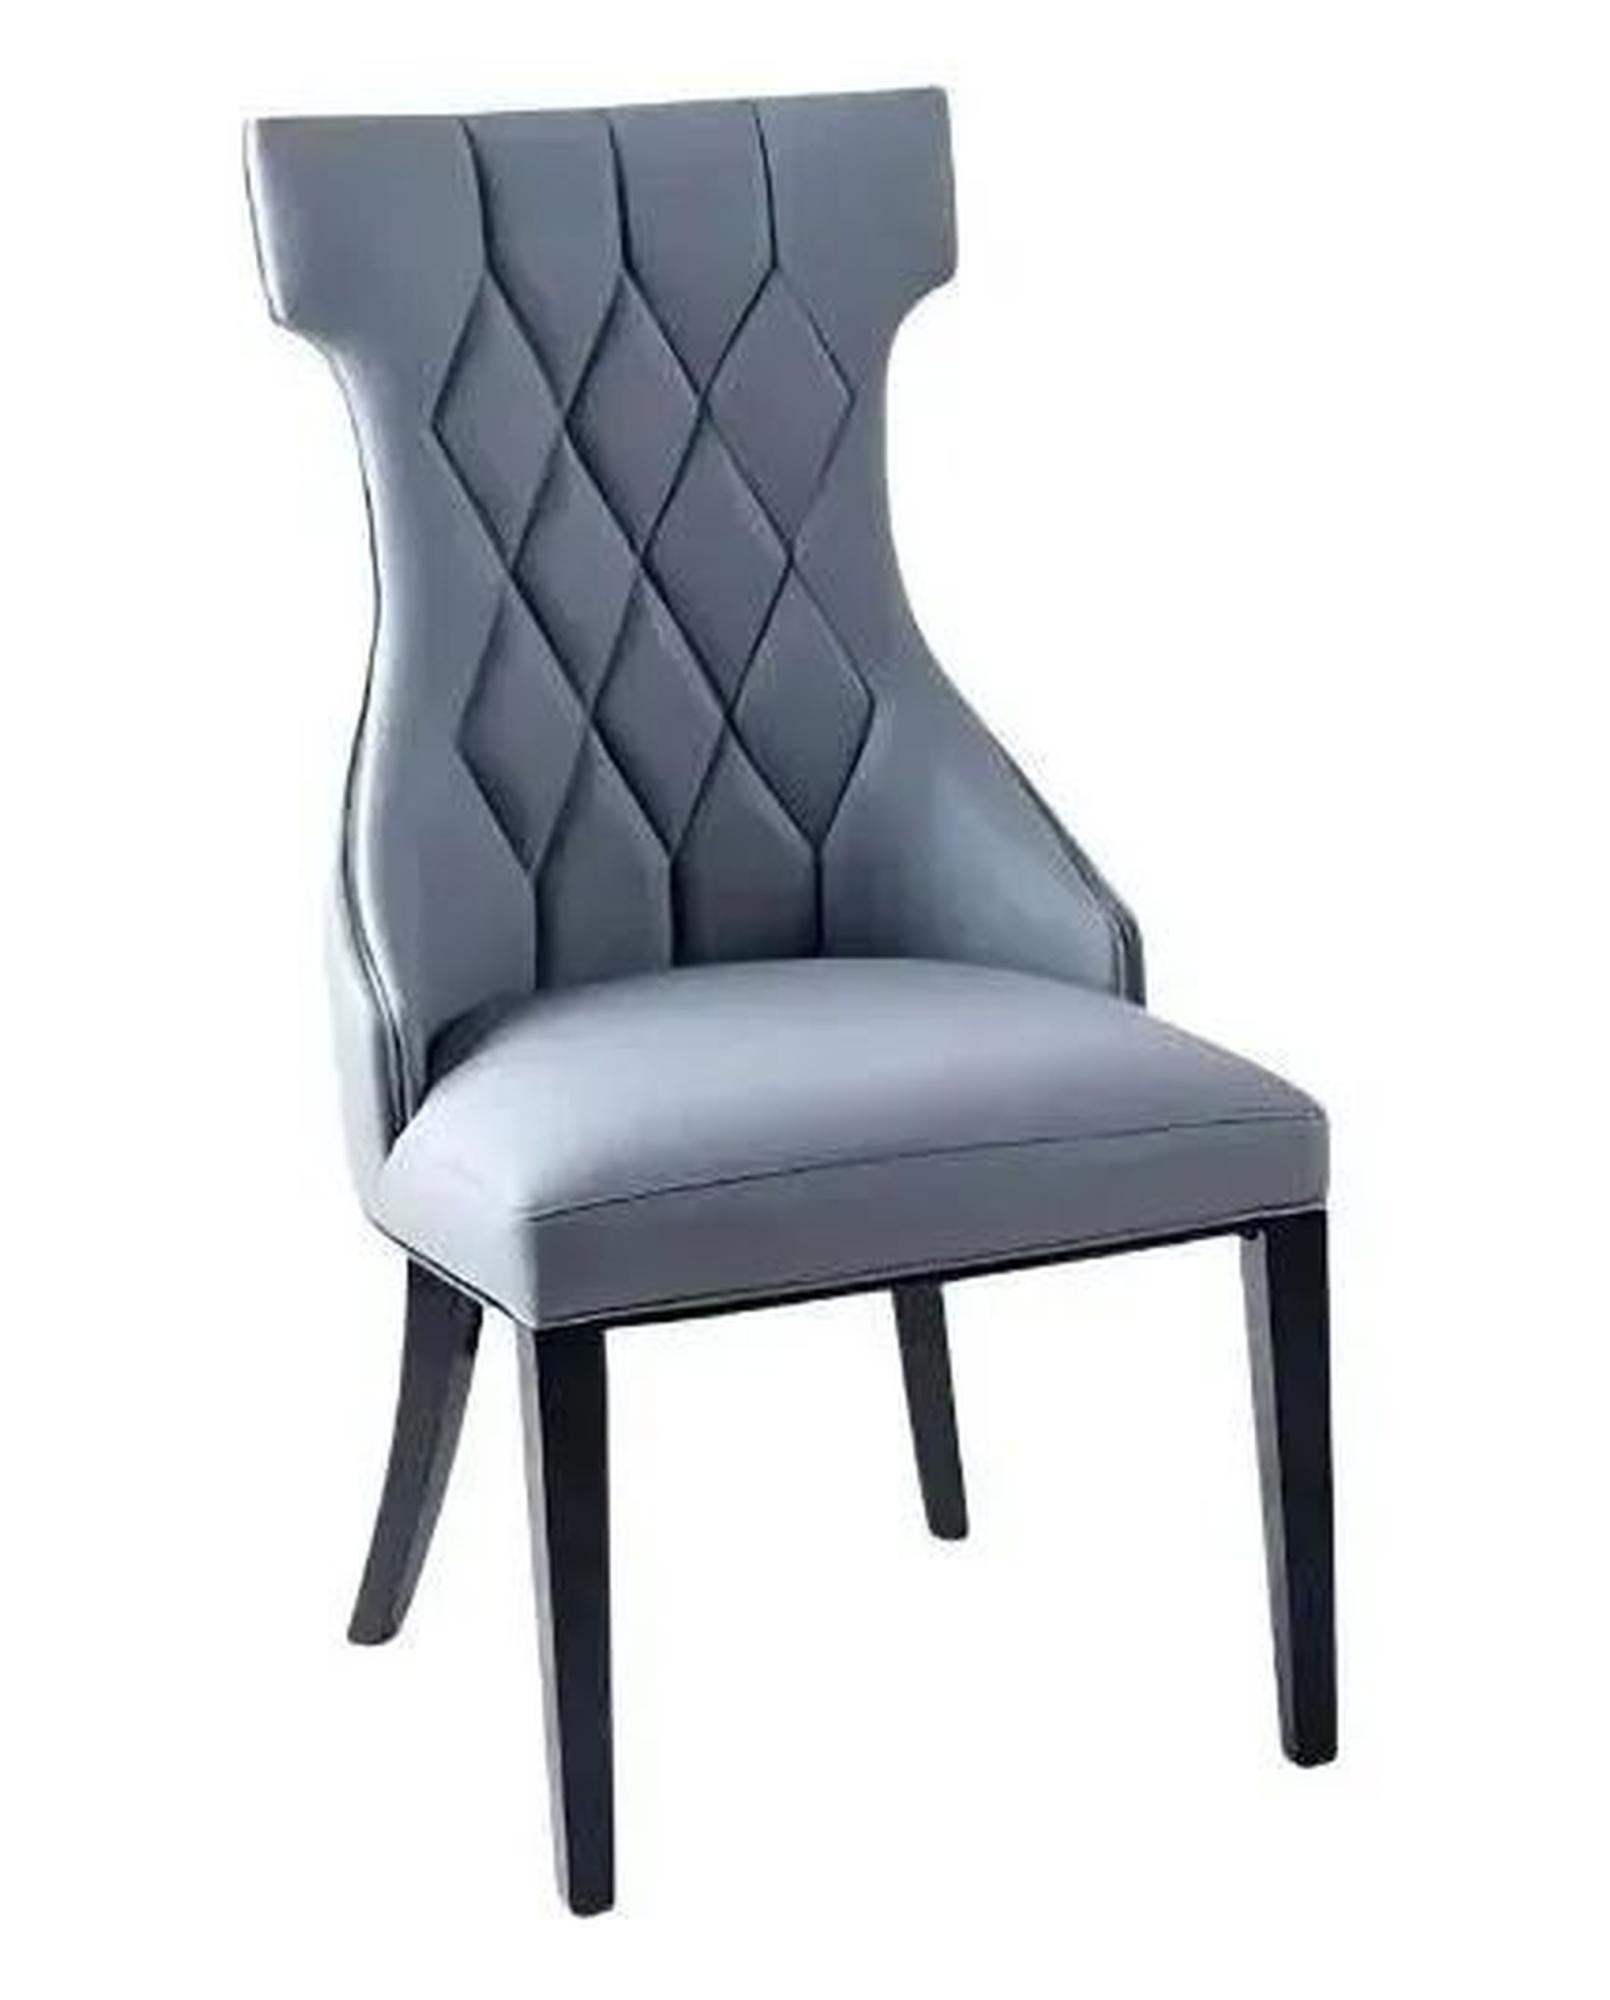 Mimi Grey Dining Chair, Leather - Faux PU with Black Wooden Legs